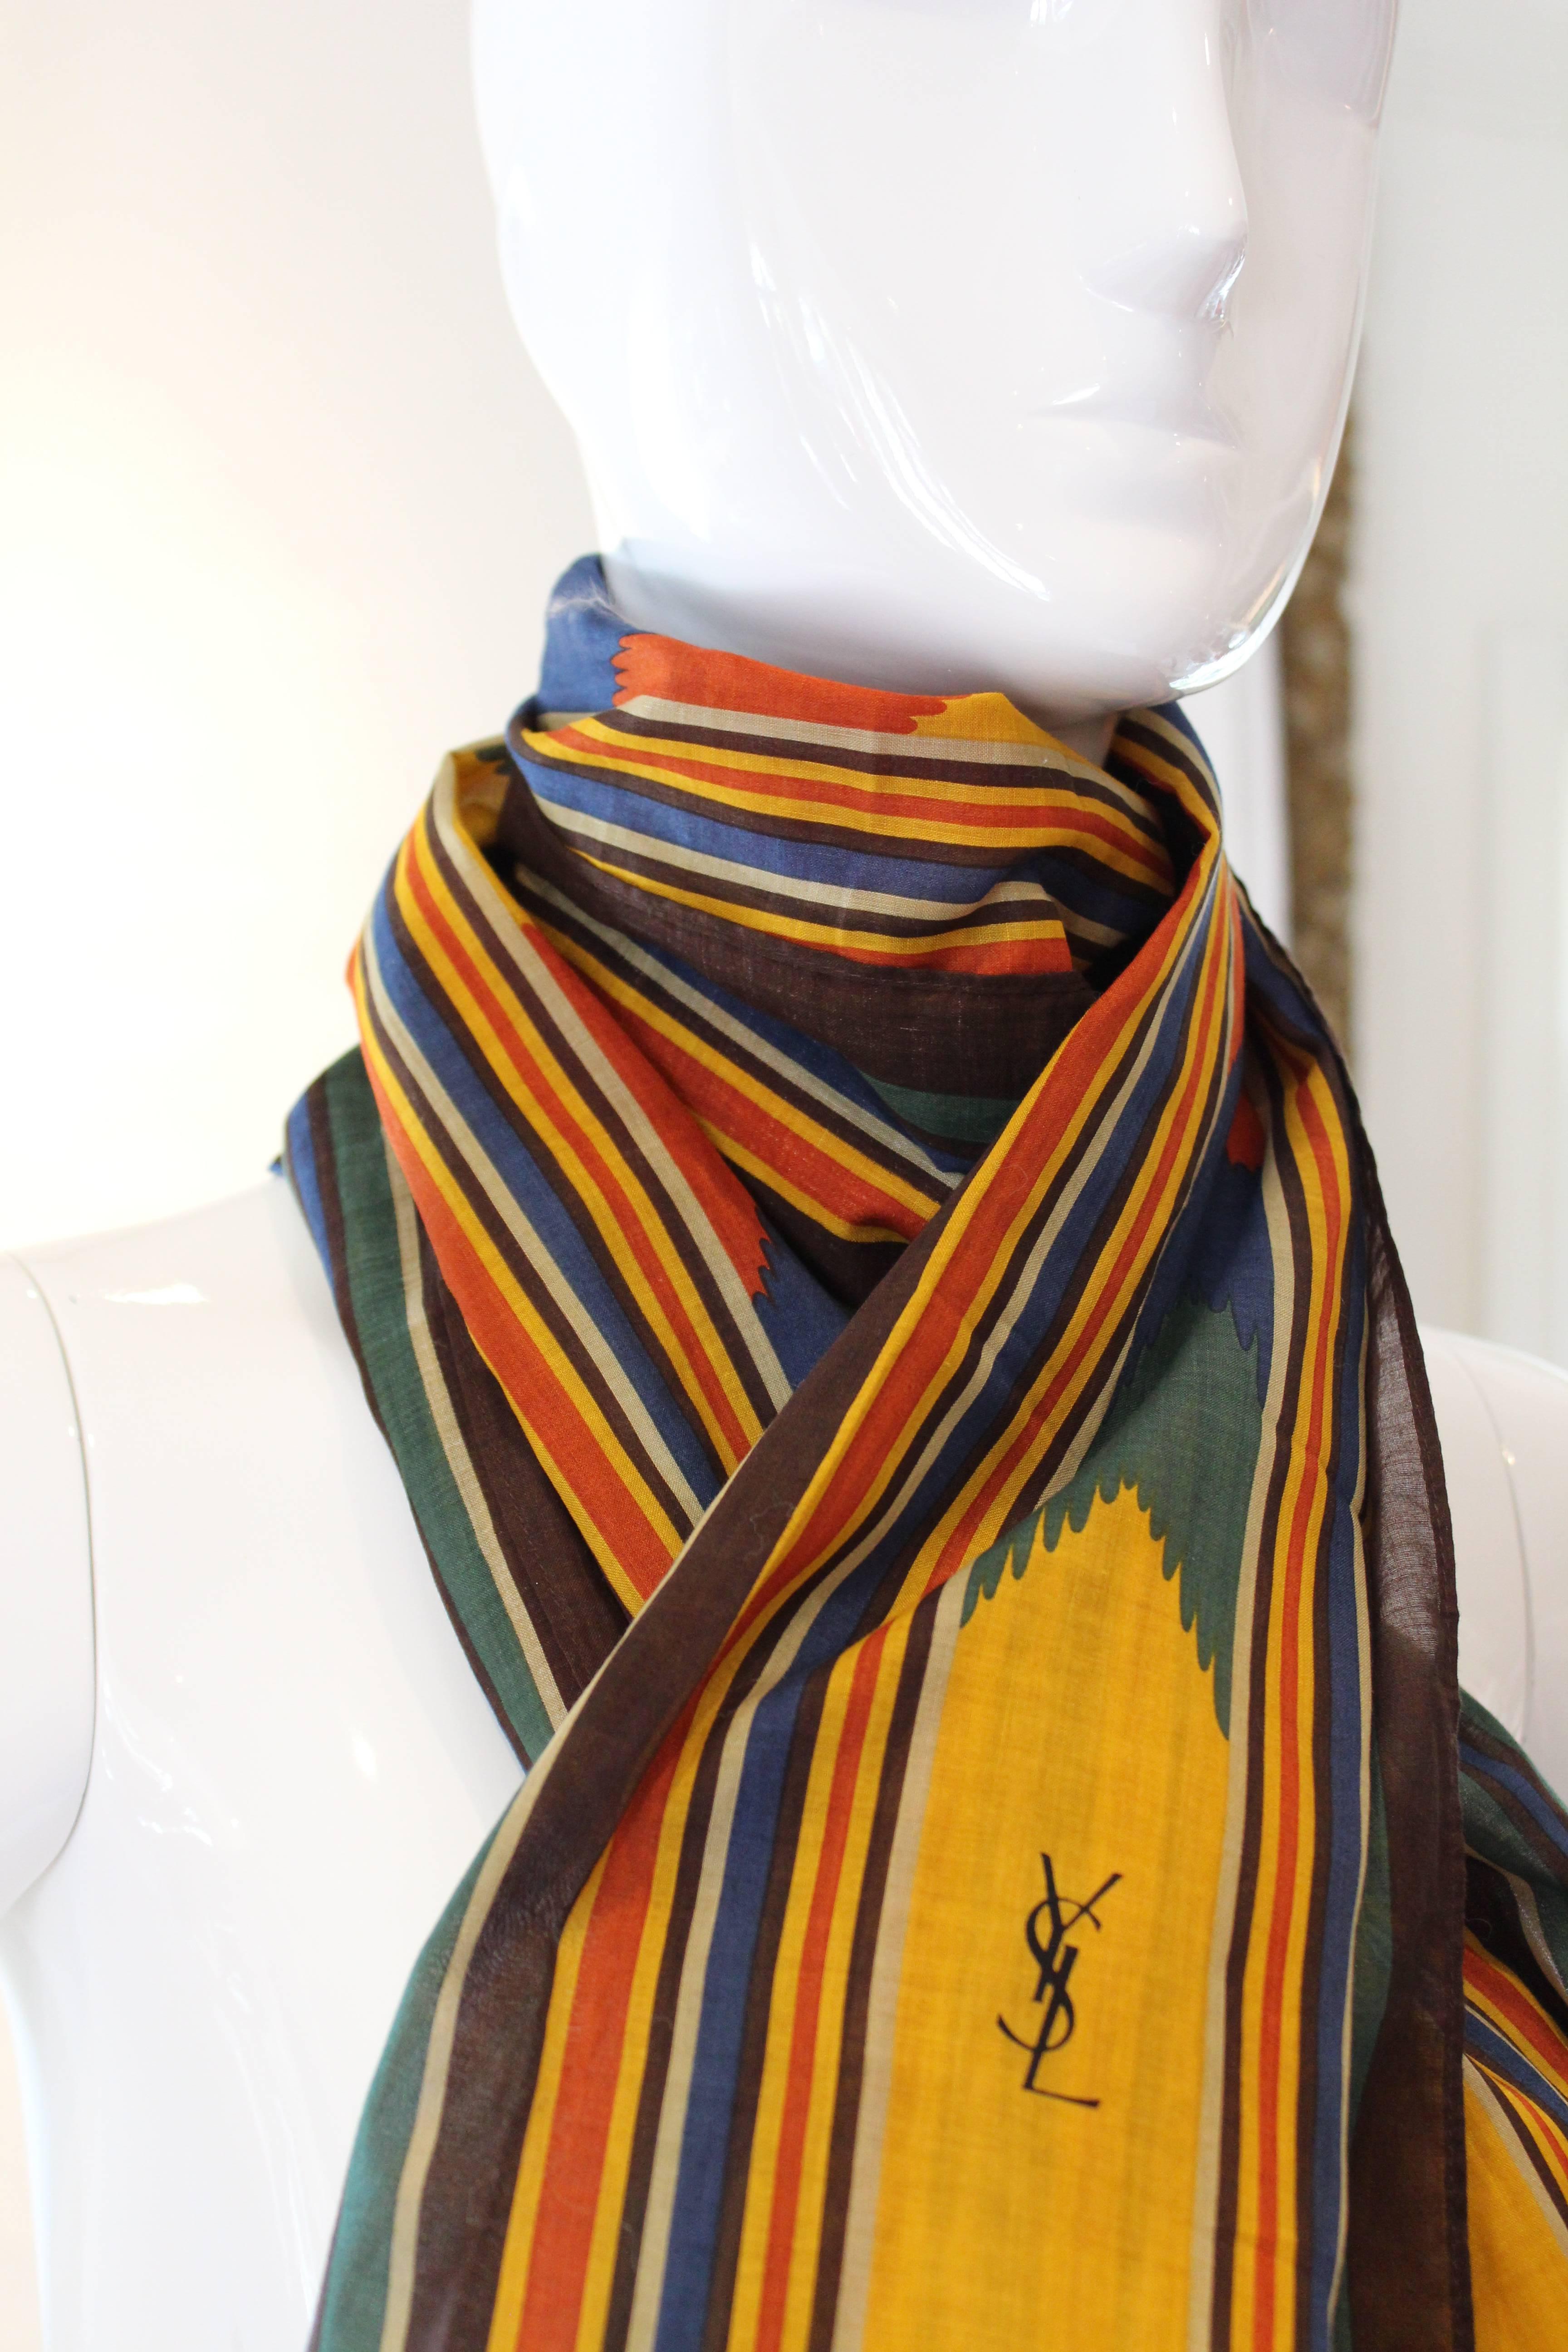 This fantastic cotton rectangular striped scarf would spice up any wardrobe.  Very functional, lightweight and the beautiful quality you appreciate from this collectible designer.  Quite a versatile piece and large size make it a good